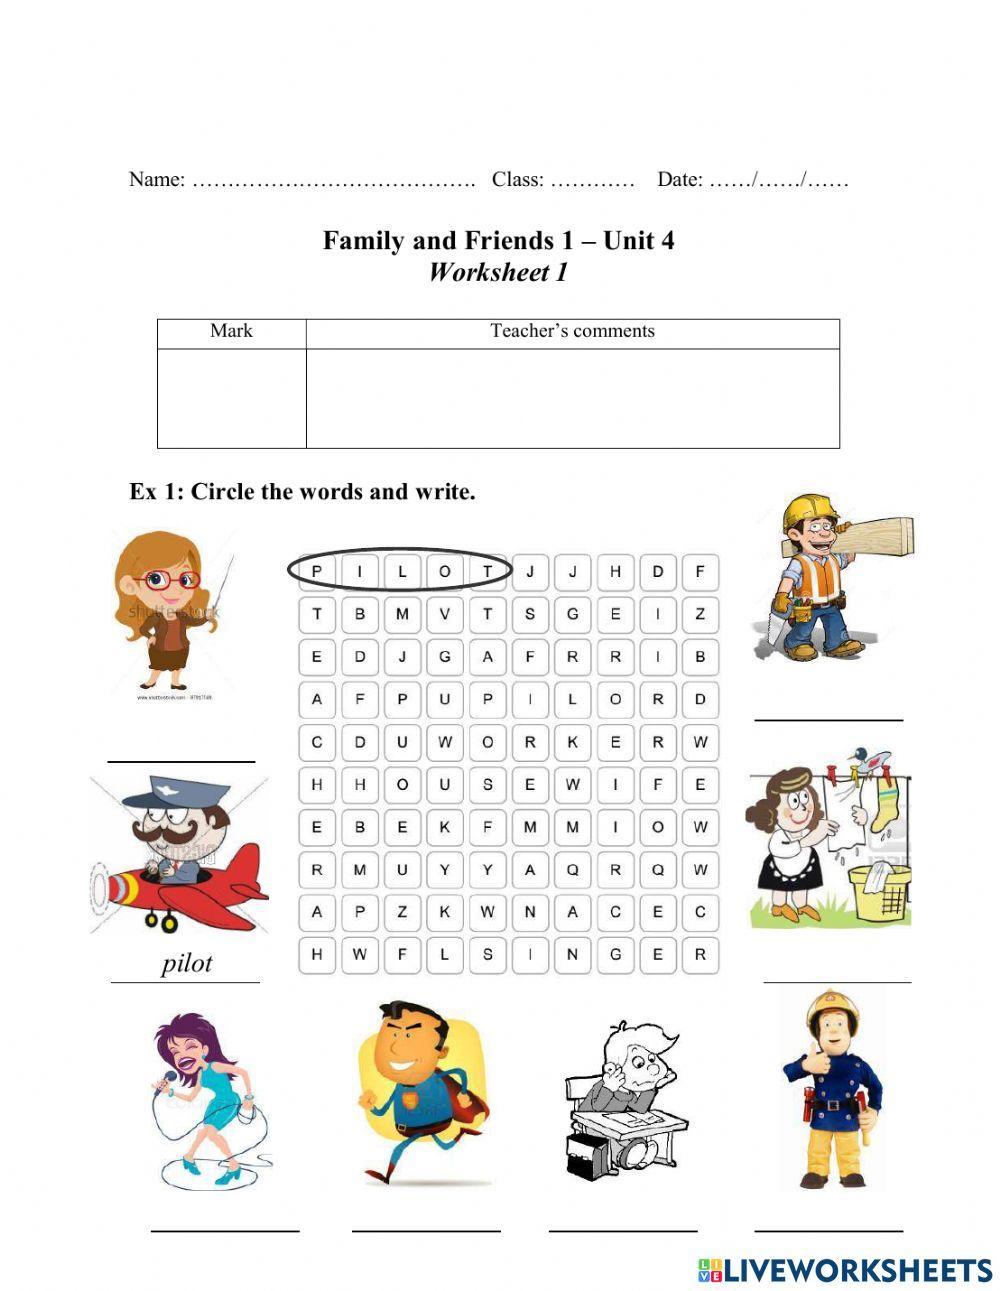 Family and Friends 1 - Unit 4 - Lesson 1&2